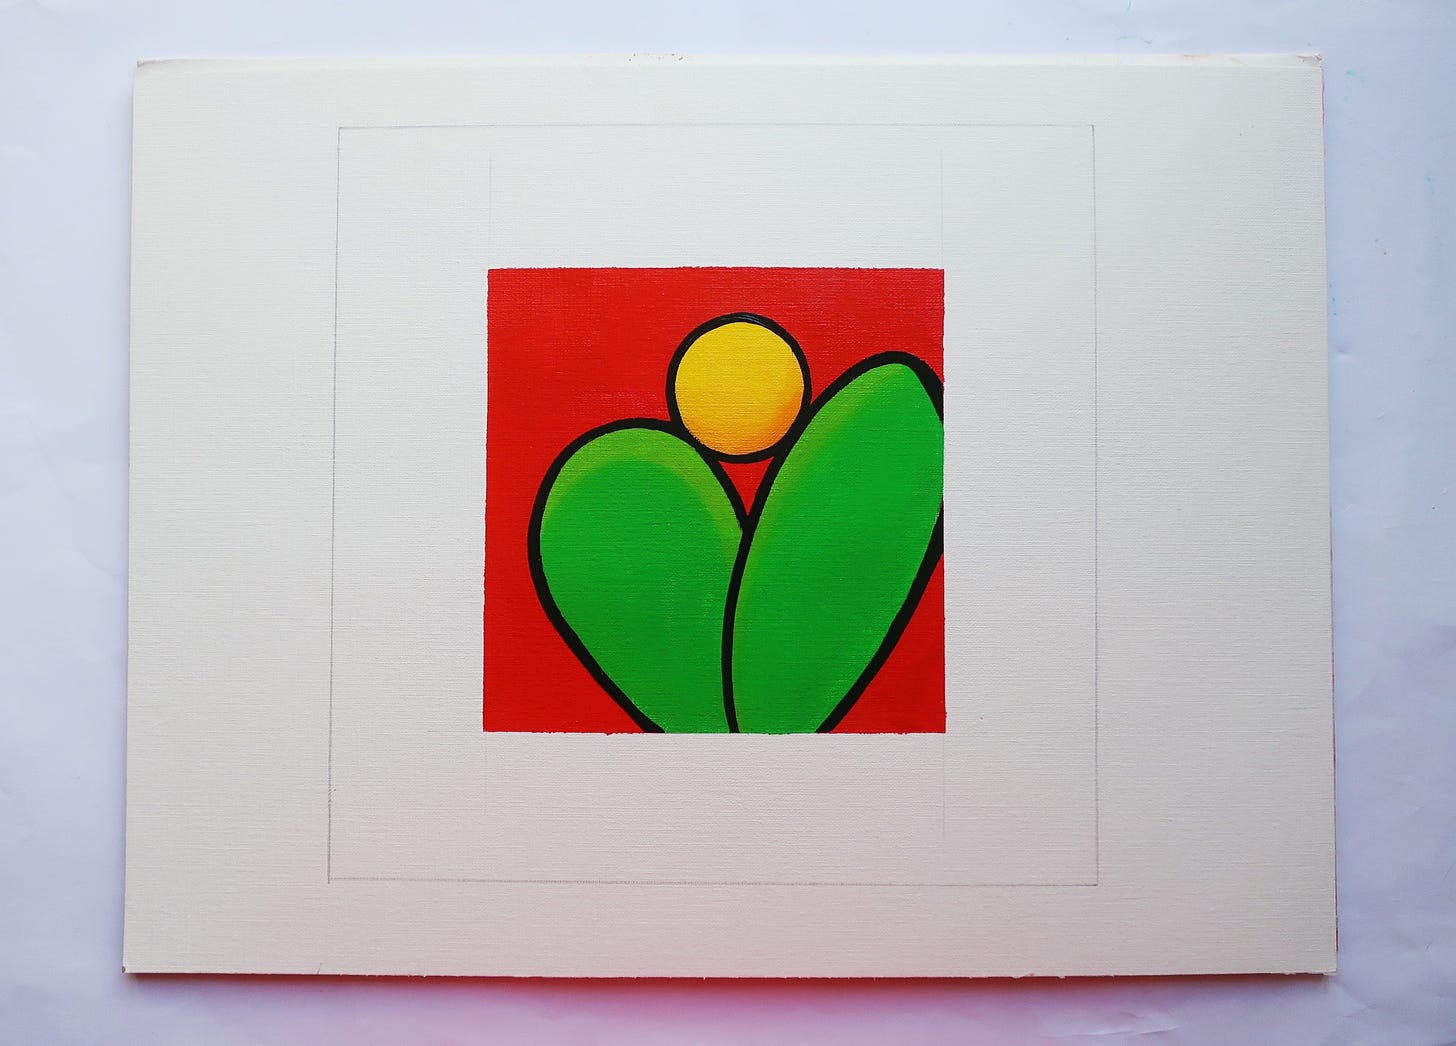 An oil painting of a round yellow shape and two green leaf shapes on a red background